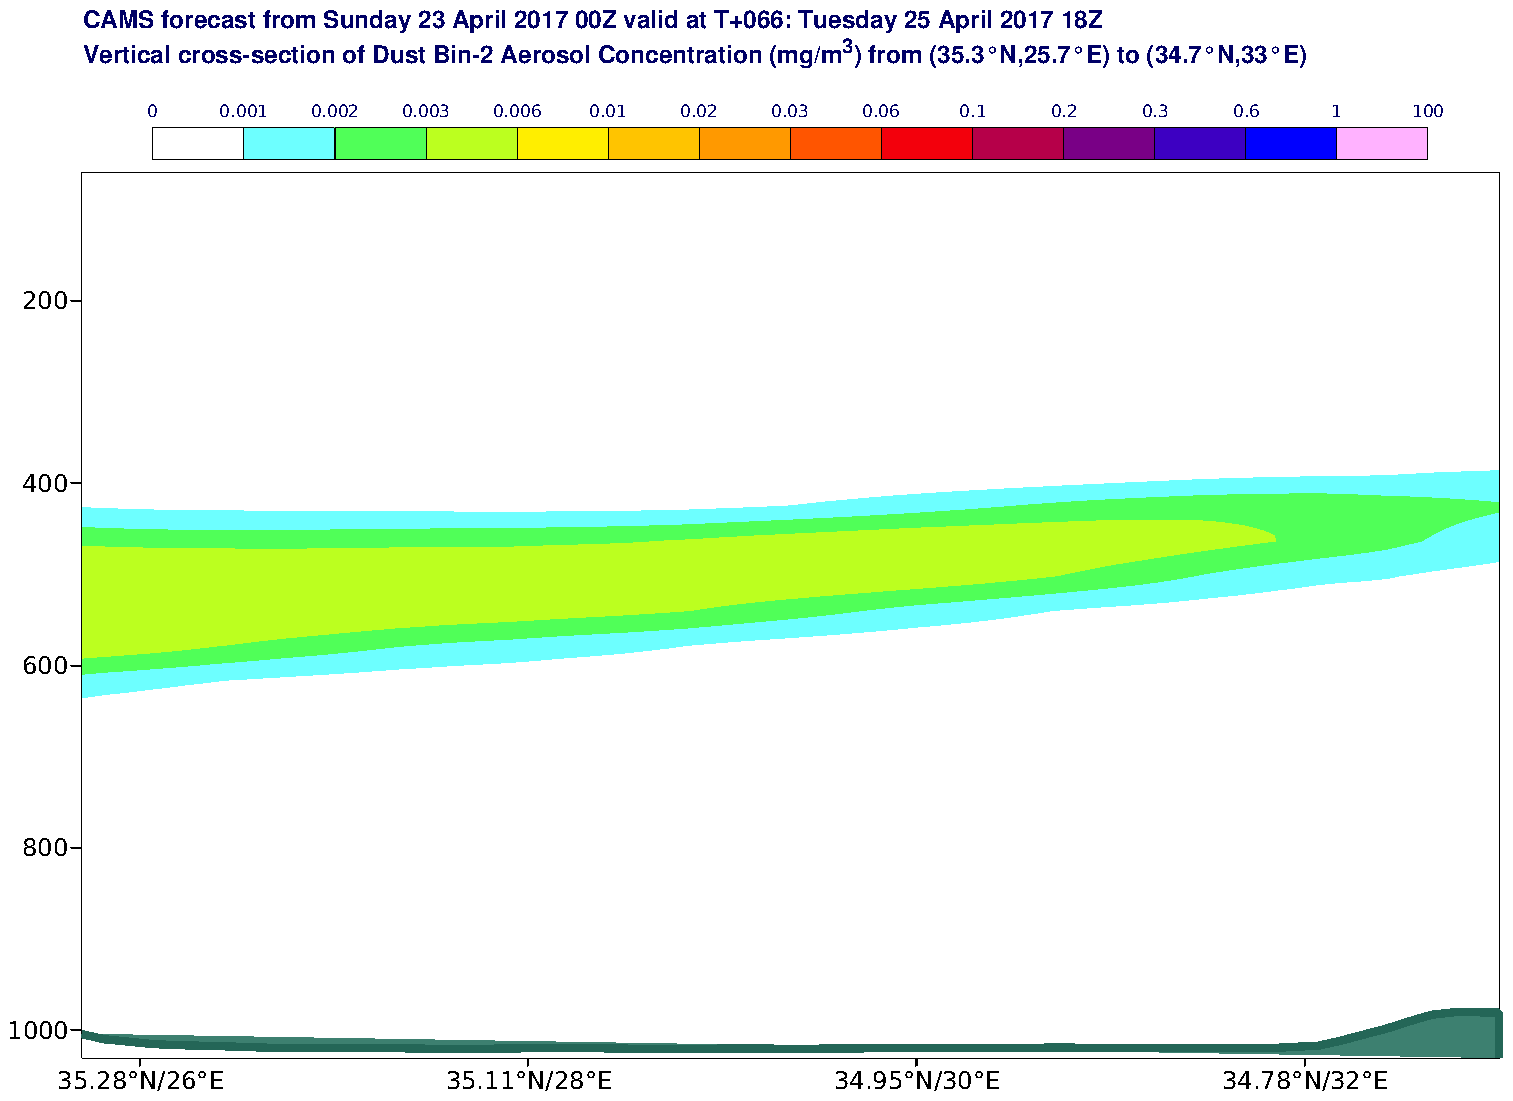 Vertical cross-section of Dust Bin-2 Aerosol Concentration (mg/m3) valid at T66 - 2017-04-25 18:00